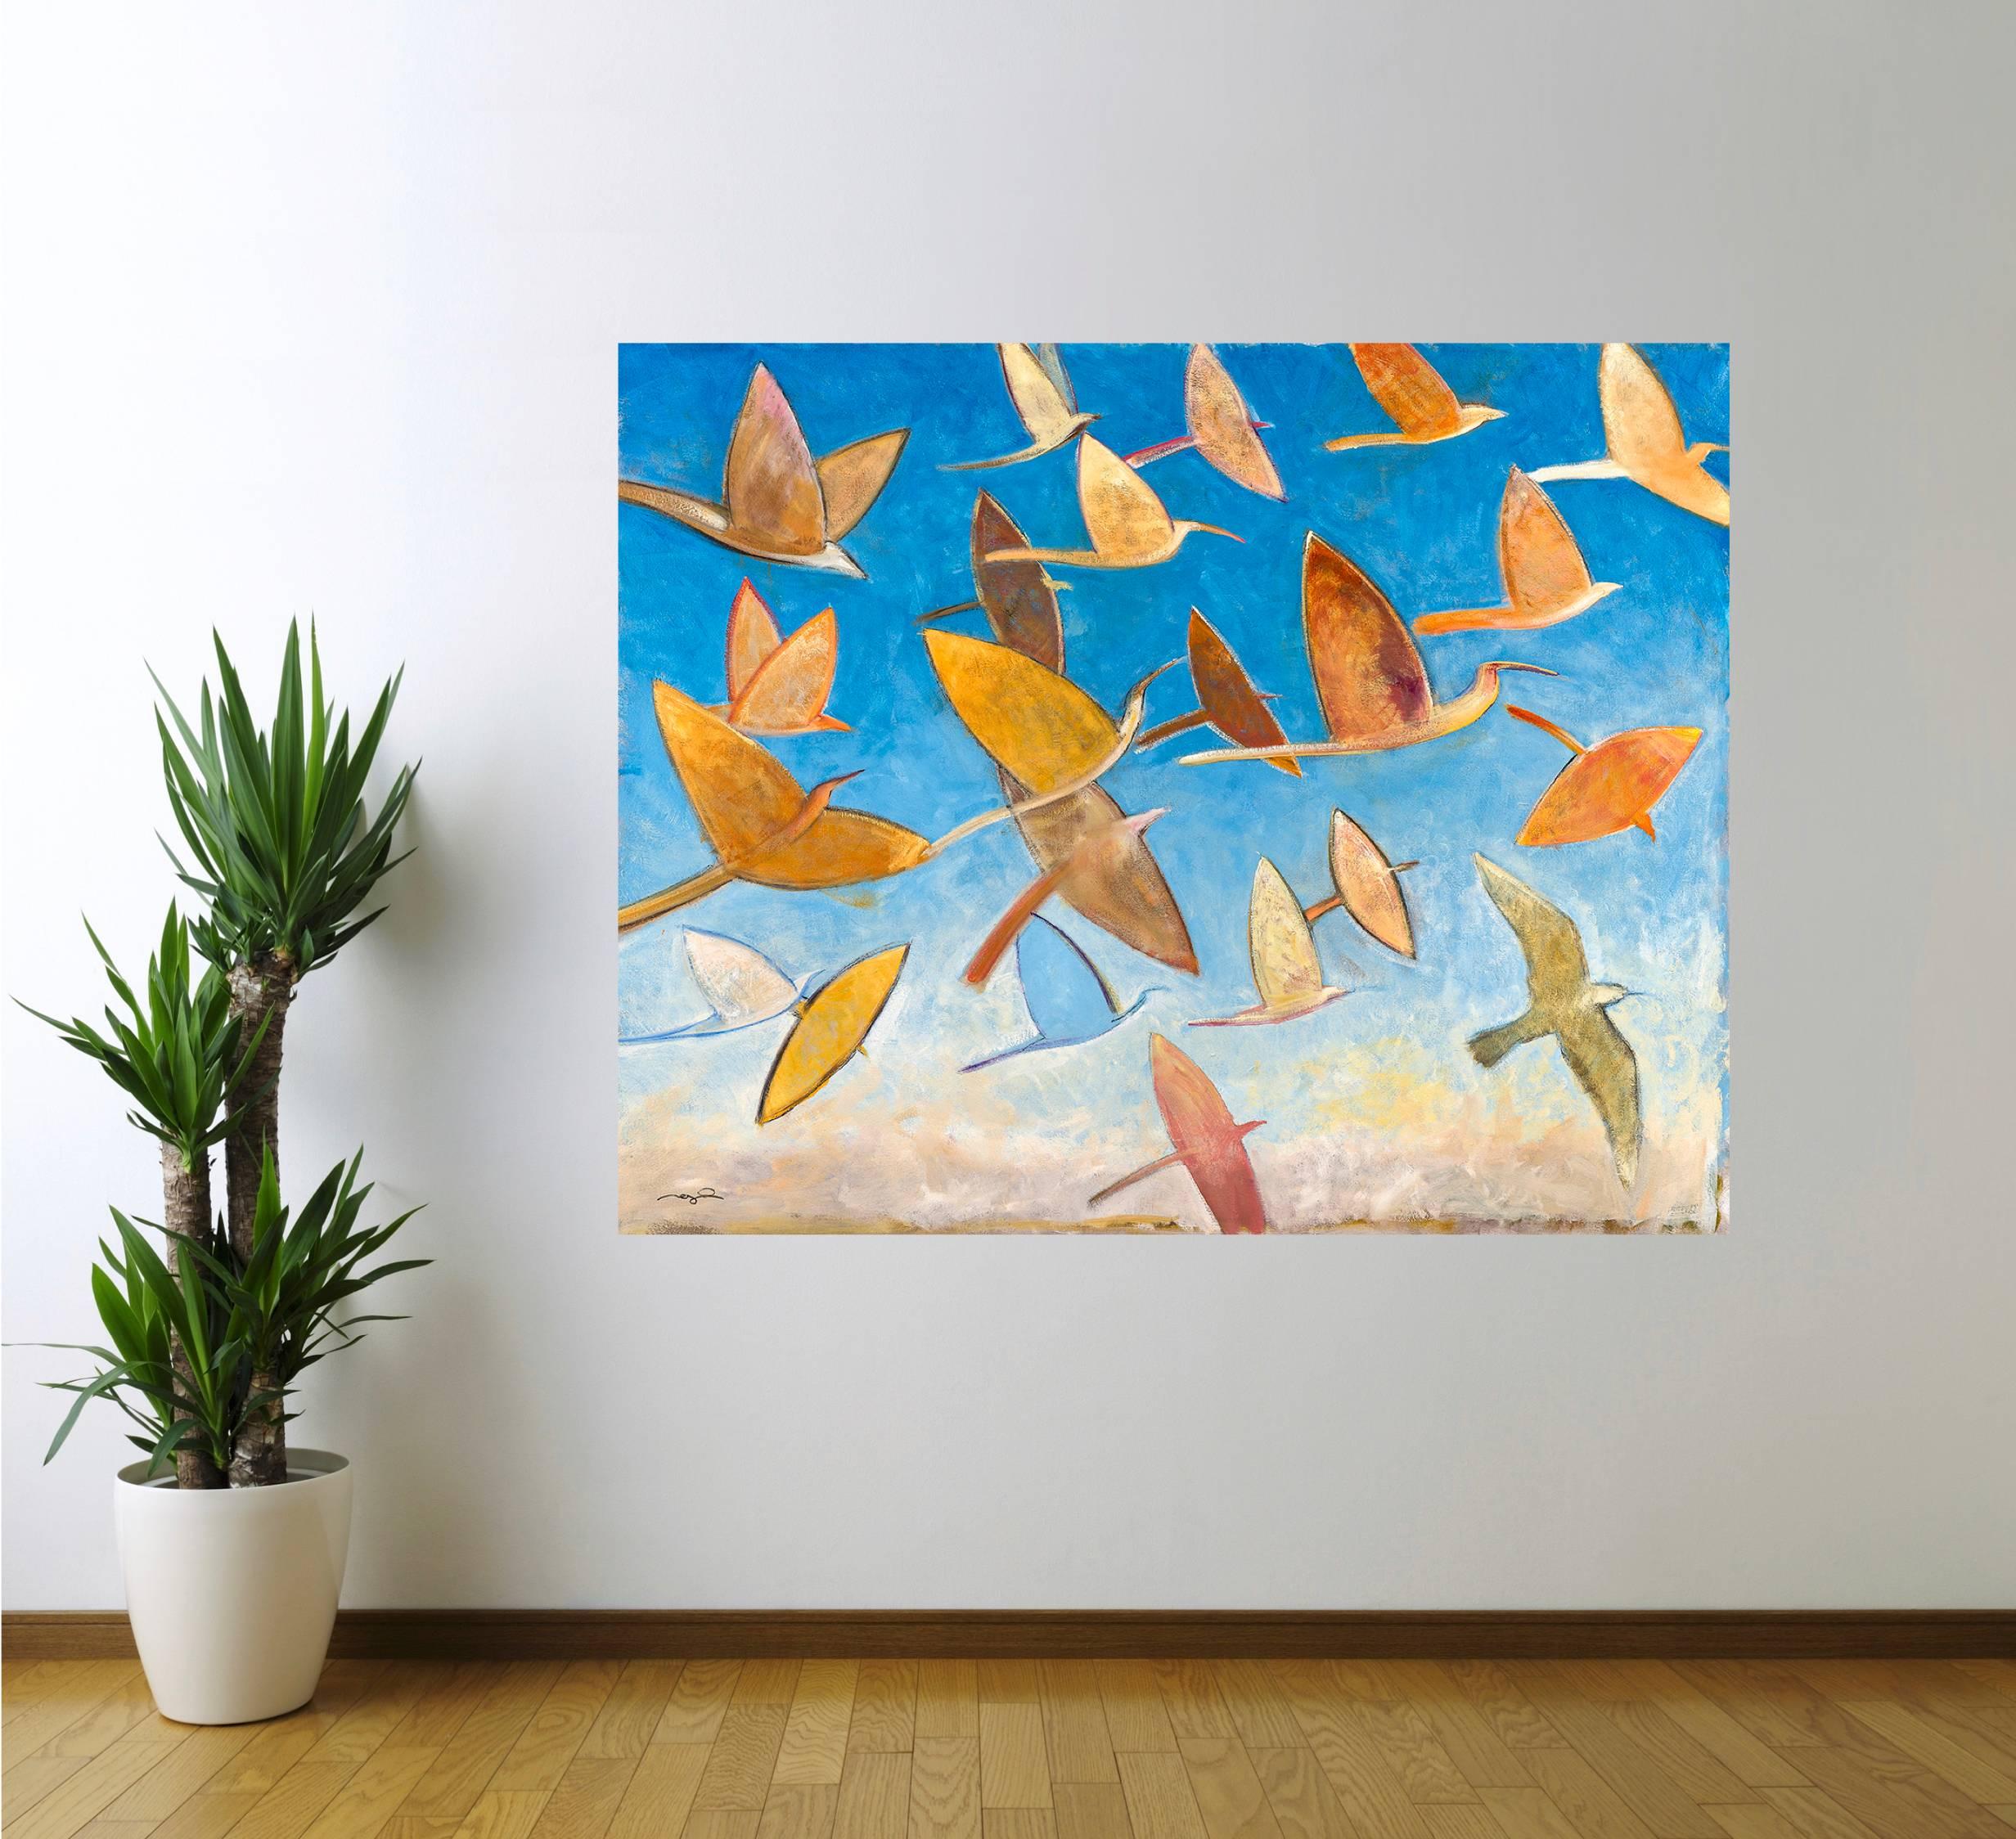 Robert Reynolds, "Sandy Hook Flock", Oil on linen, 48" x 60"

This original oil painting was created for the newly renovated Sandy Hook Elementary School and has been reproduced as a mural that stands 8' x 8' in the school's